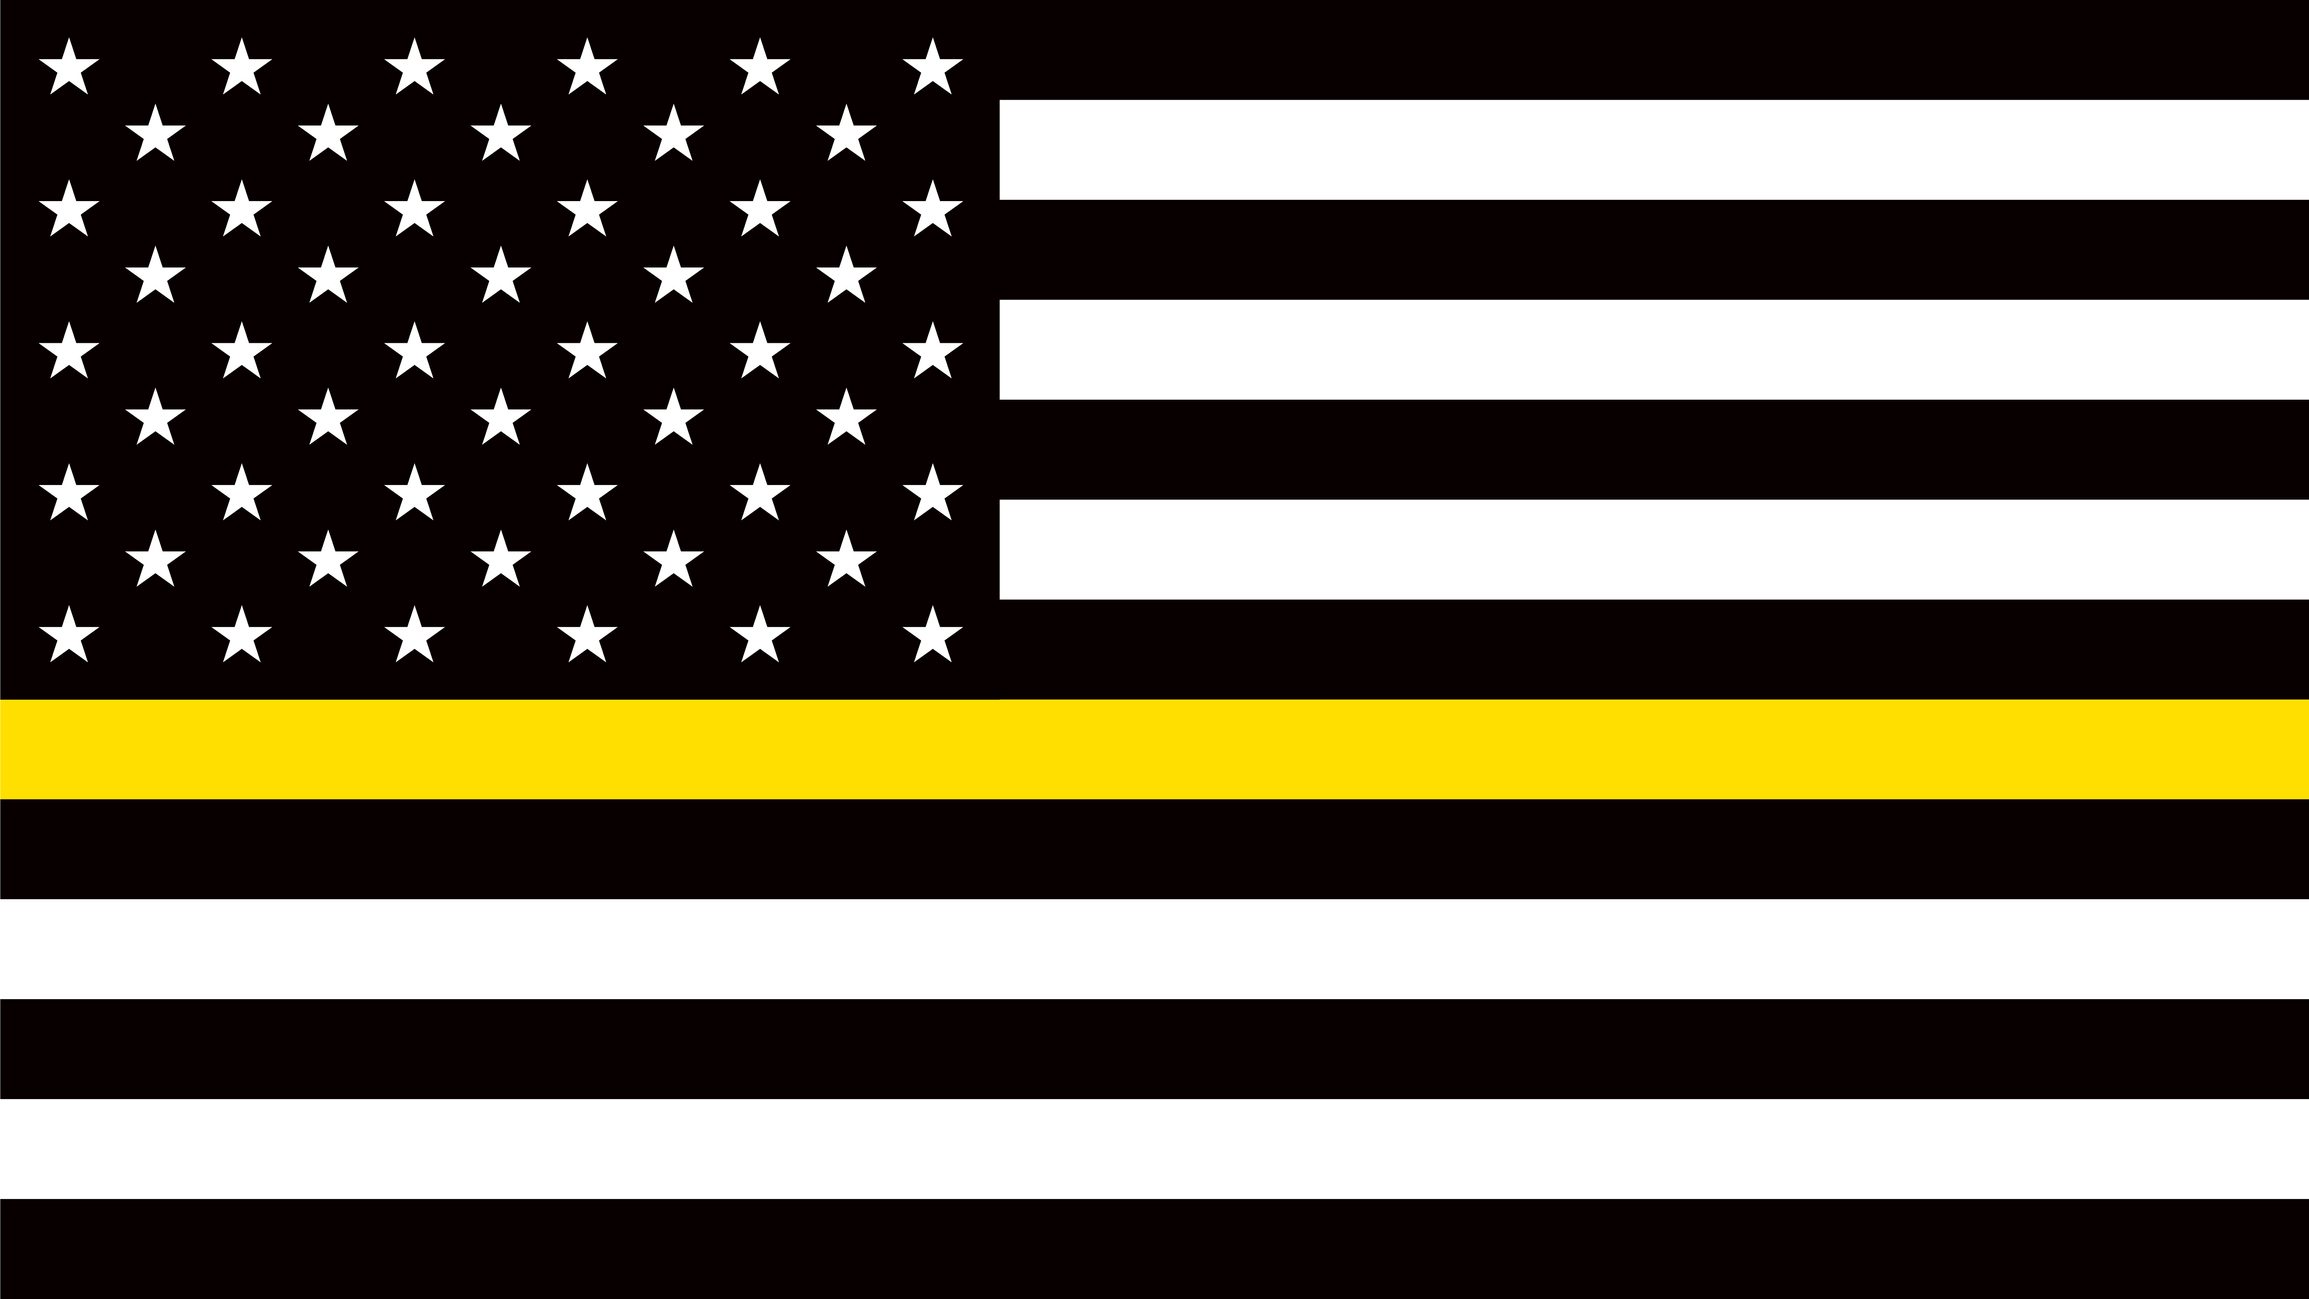 USA flag with a thin yellow or gold line - a sign to honor and respect American Dispatchers, Security Guards and Loss Prevention